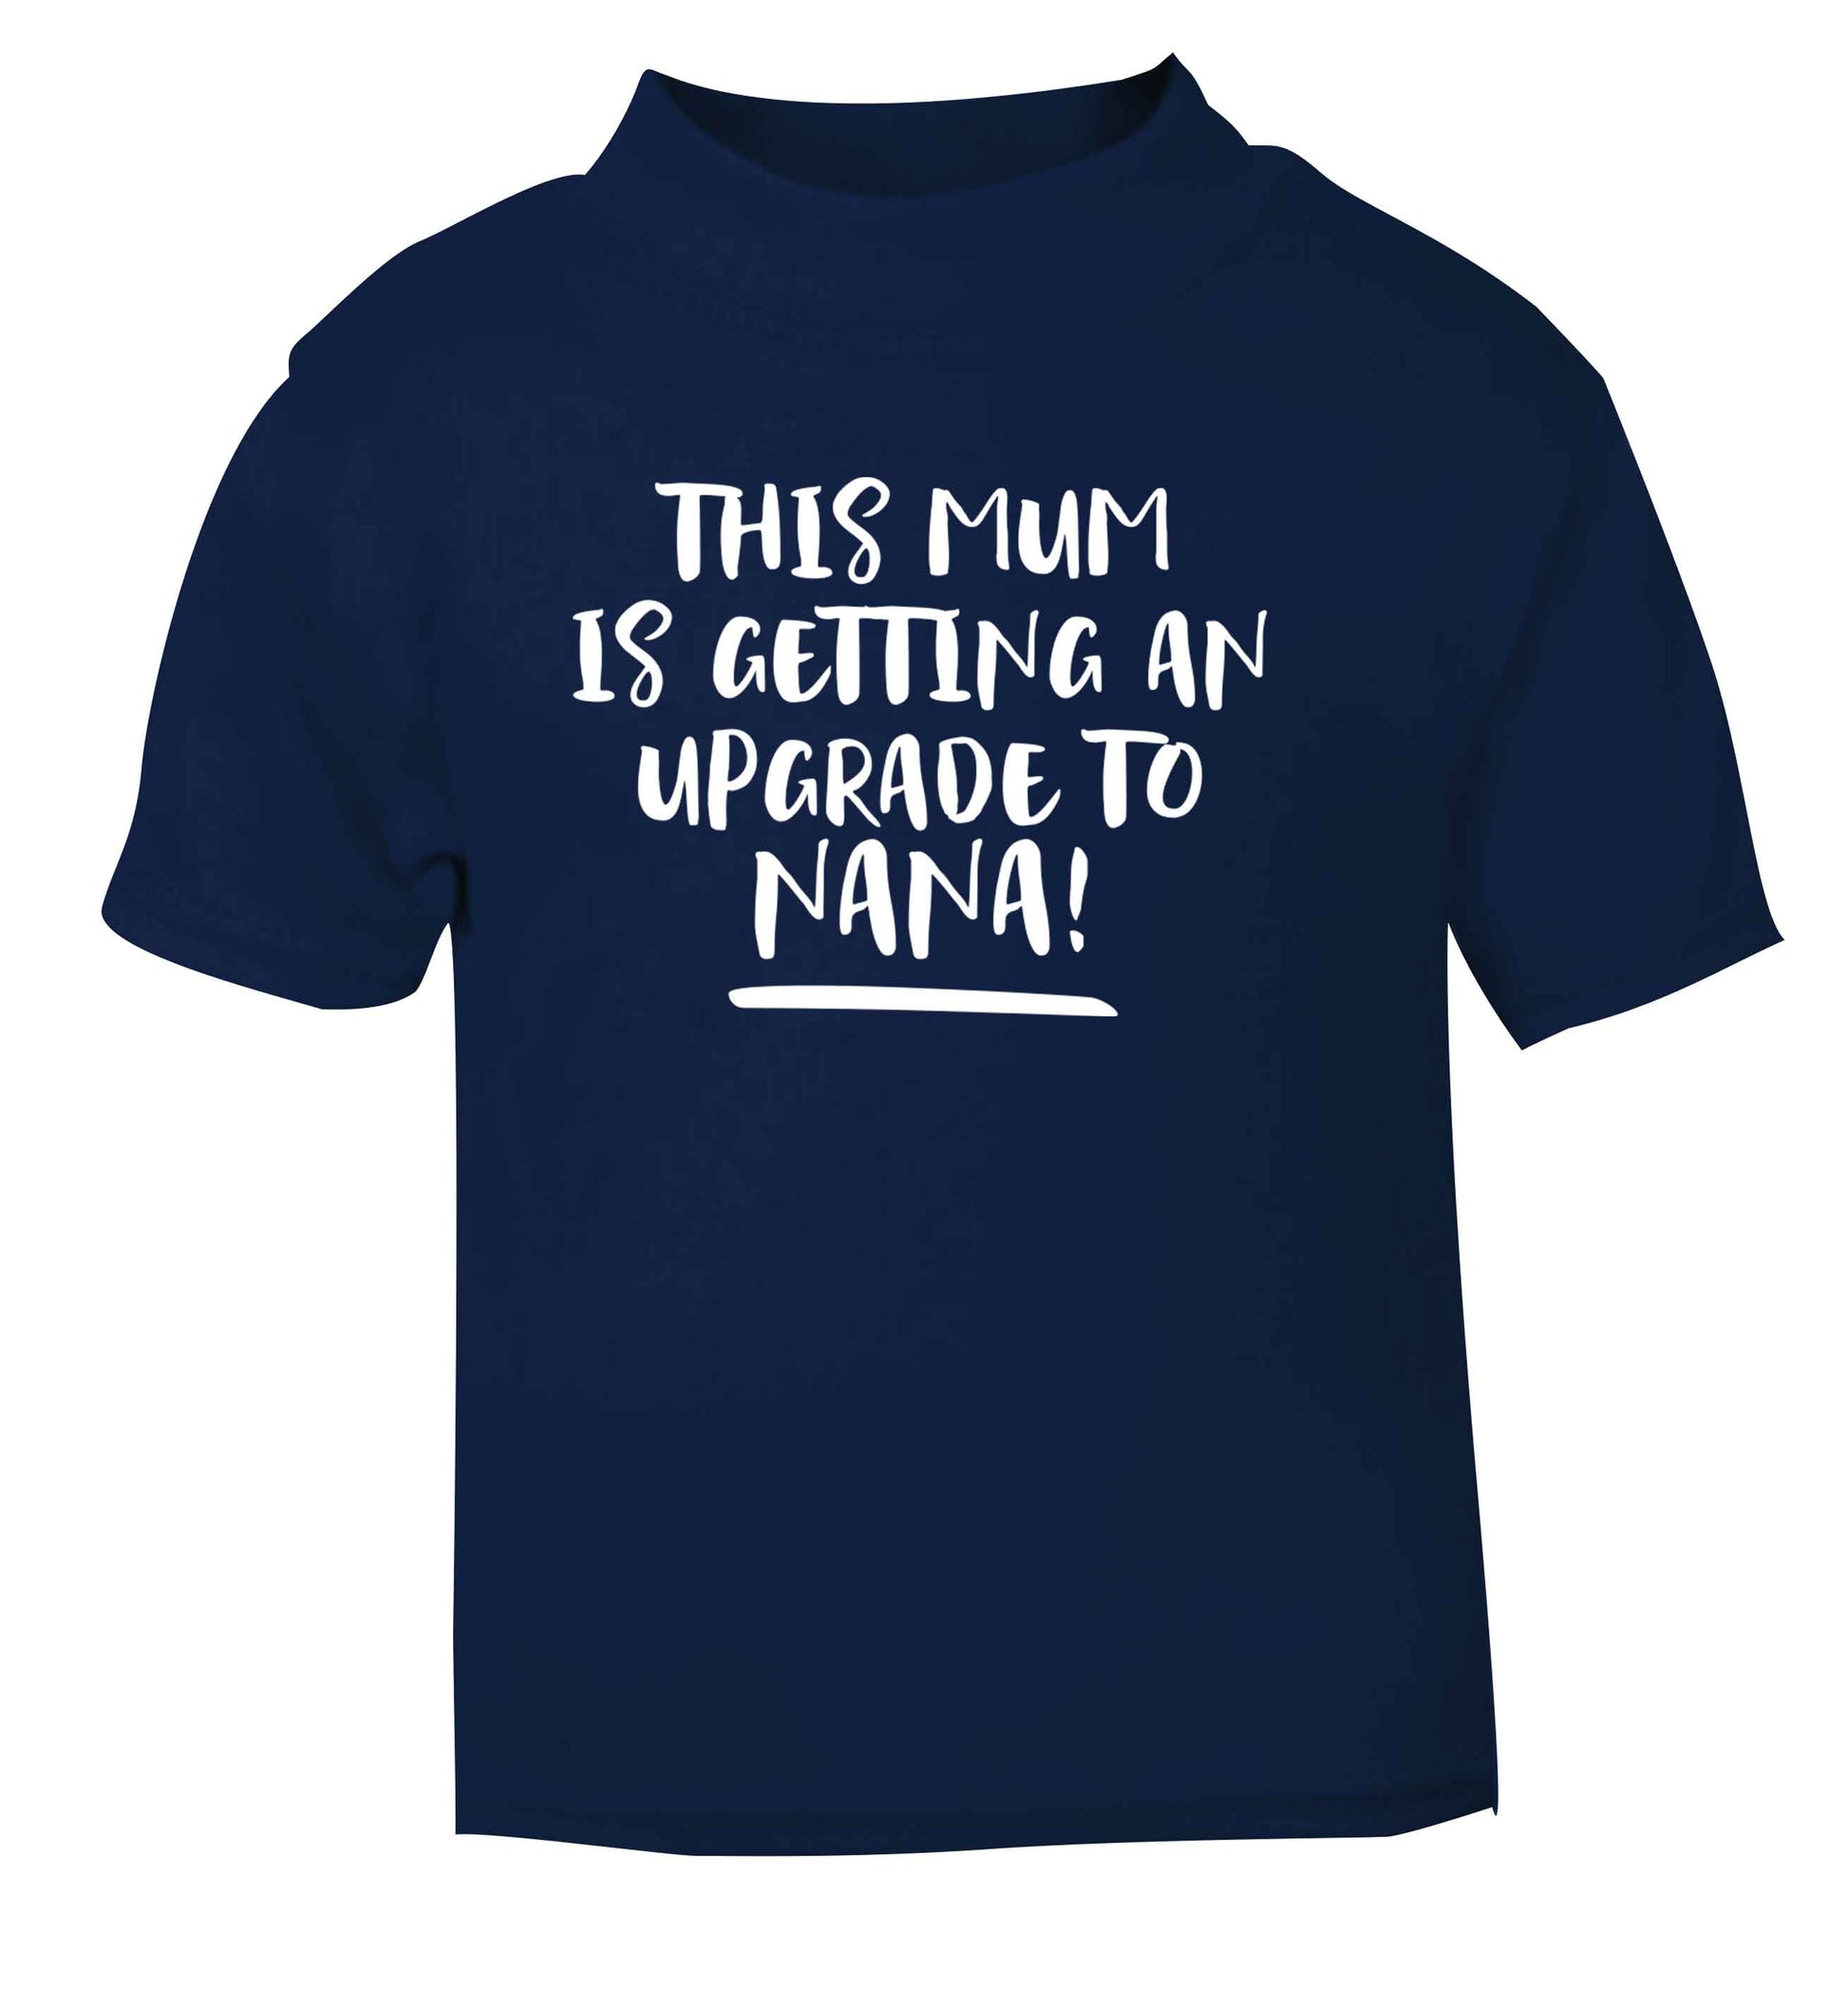 This mum is getting an upgrade to nana! navy Baby Toddler Tshirt 2 Years